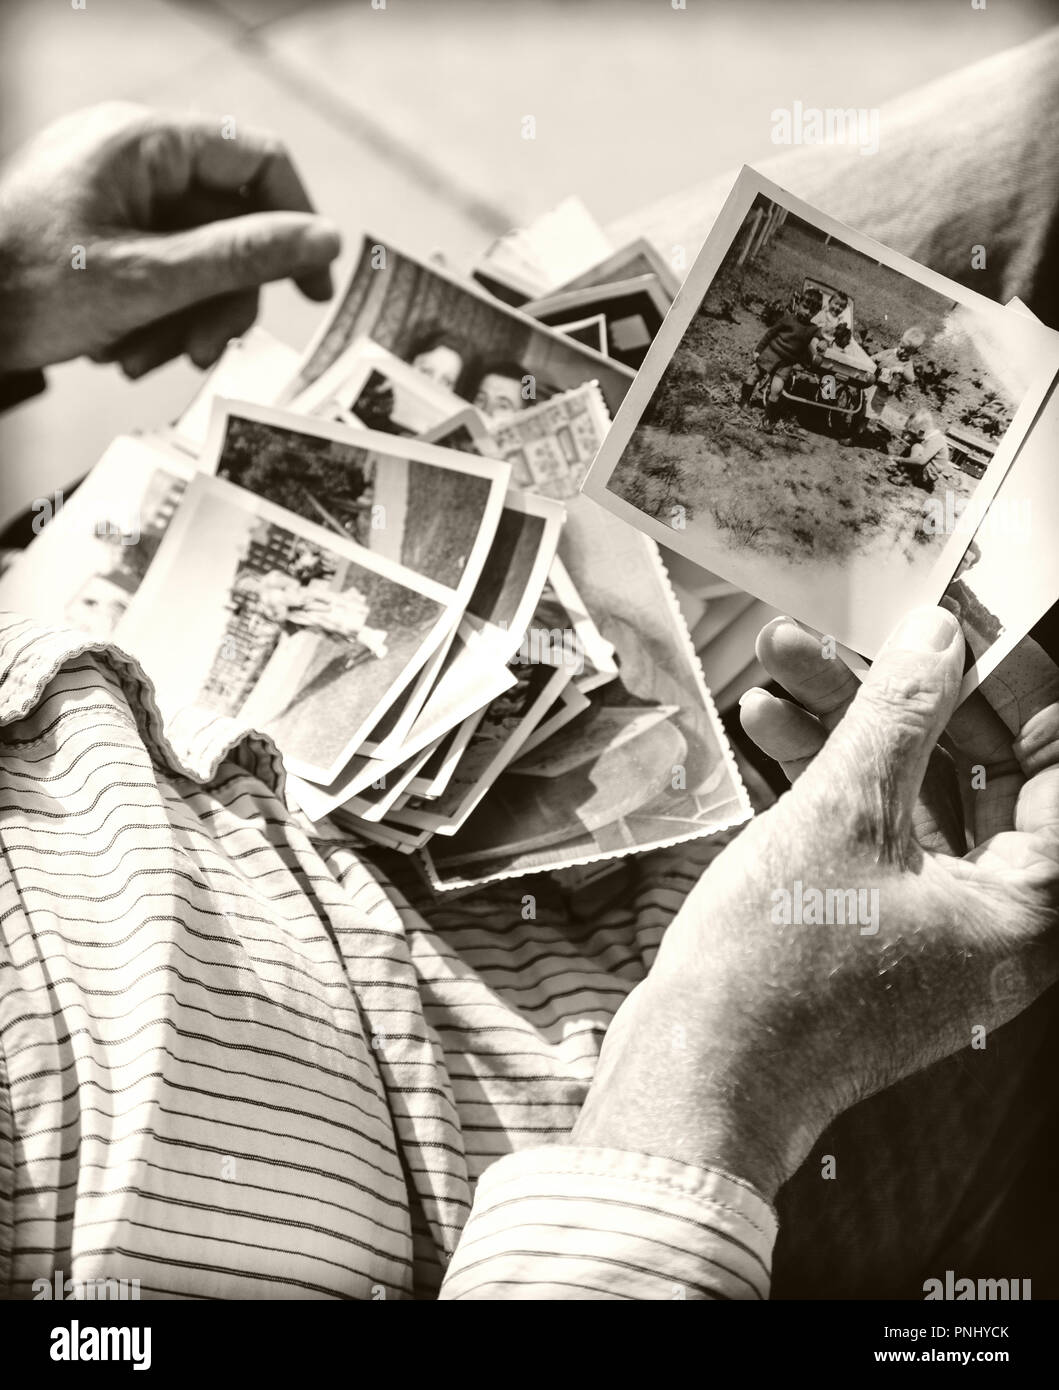 Looking back - No-one can take away your memories. Hands holding old photographs. Stock Photo